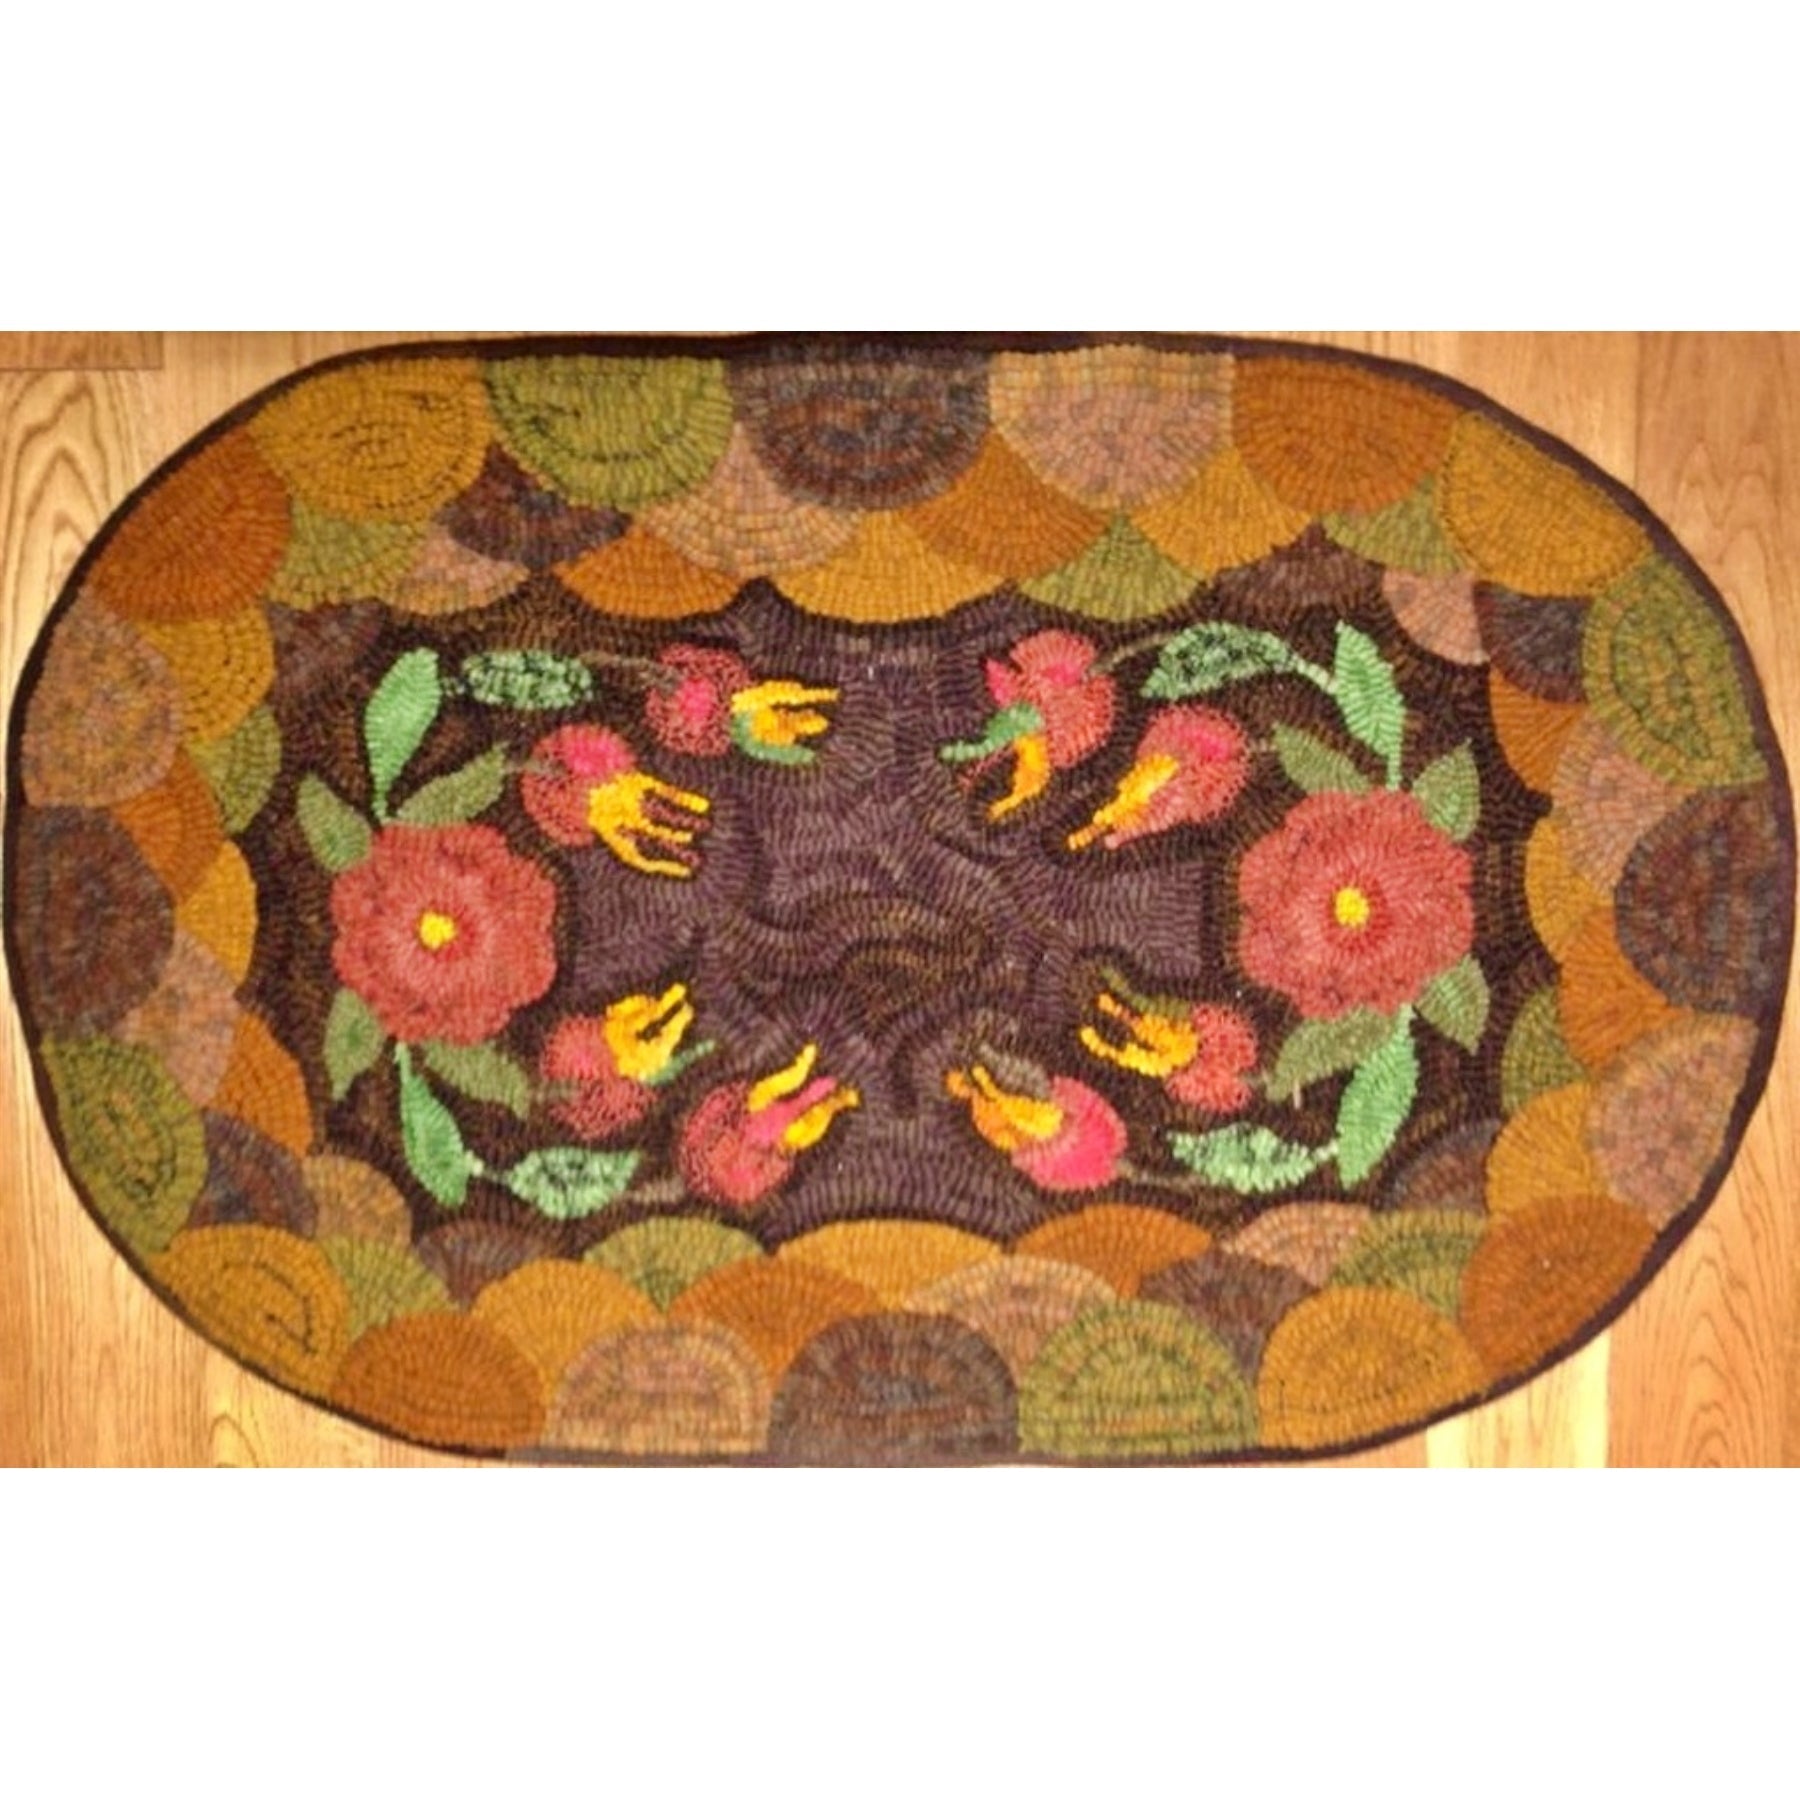 Williams Antiques, rug hooked by Ania Knap